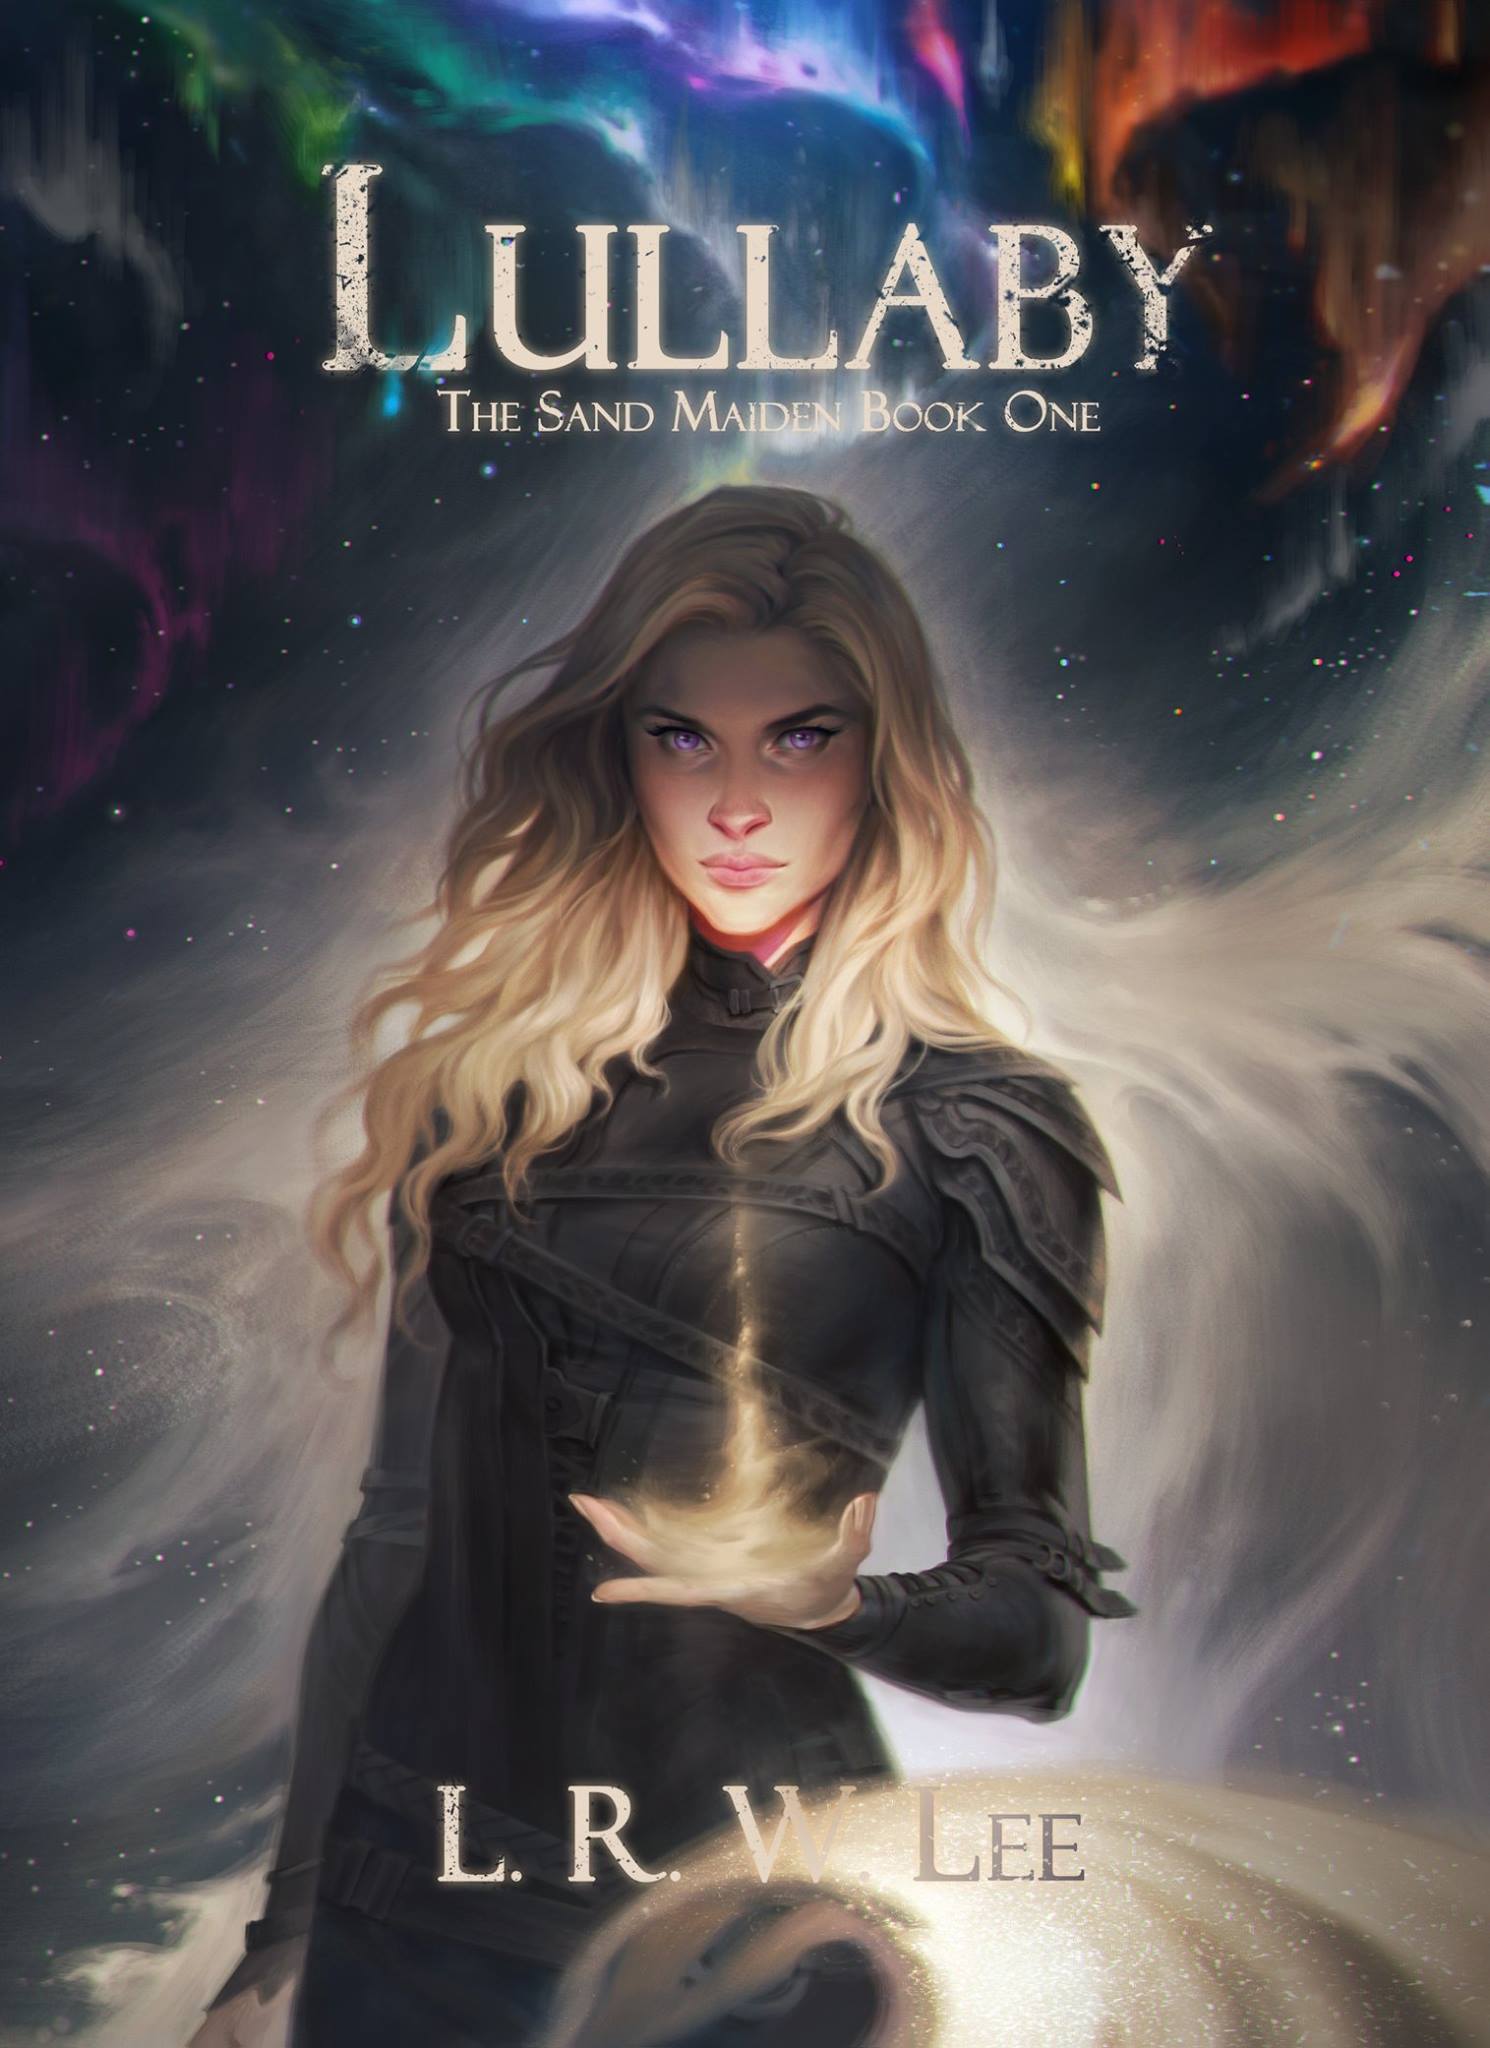 Interview: L.R.W. Lee, Author of LULLABY 